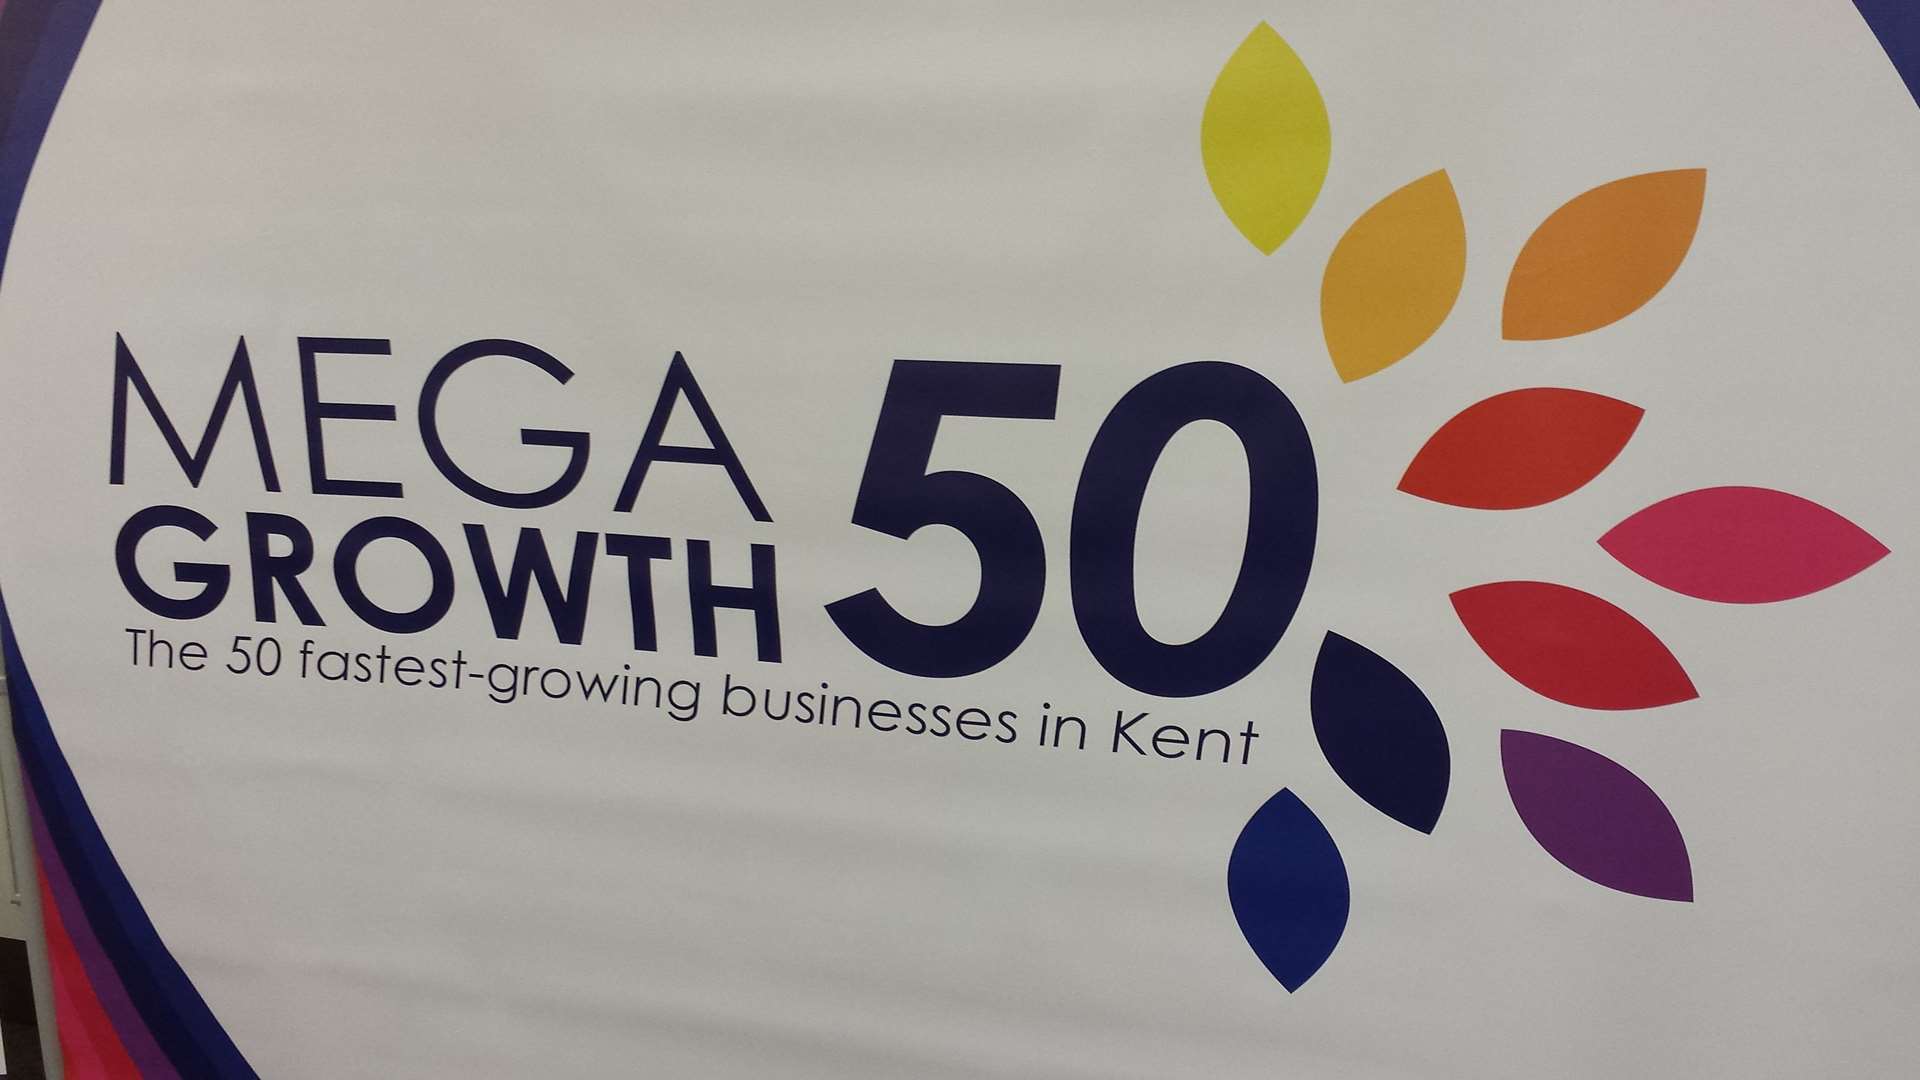 The MegaGrowth 50 list 2015 was revealed at Turkey Mill, Maidstone